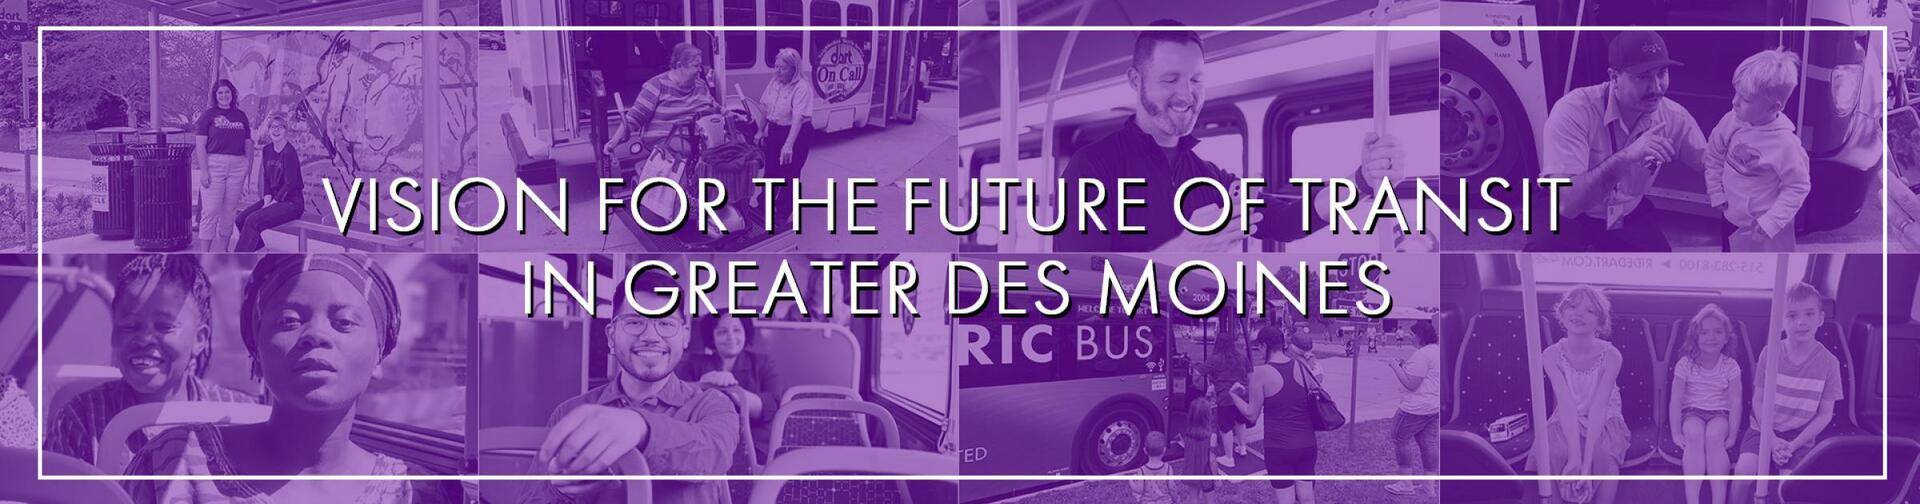 Vision for the future of transit in Greater Des Moines